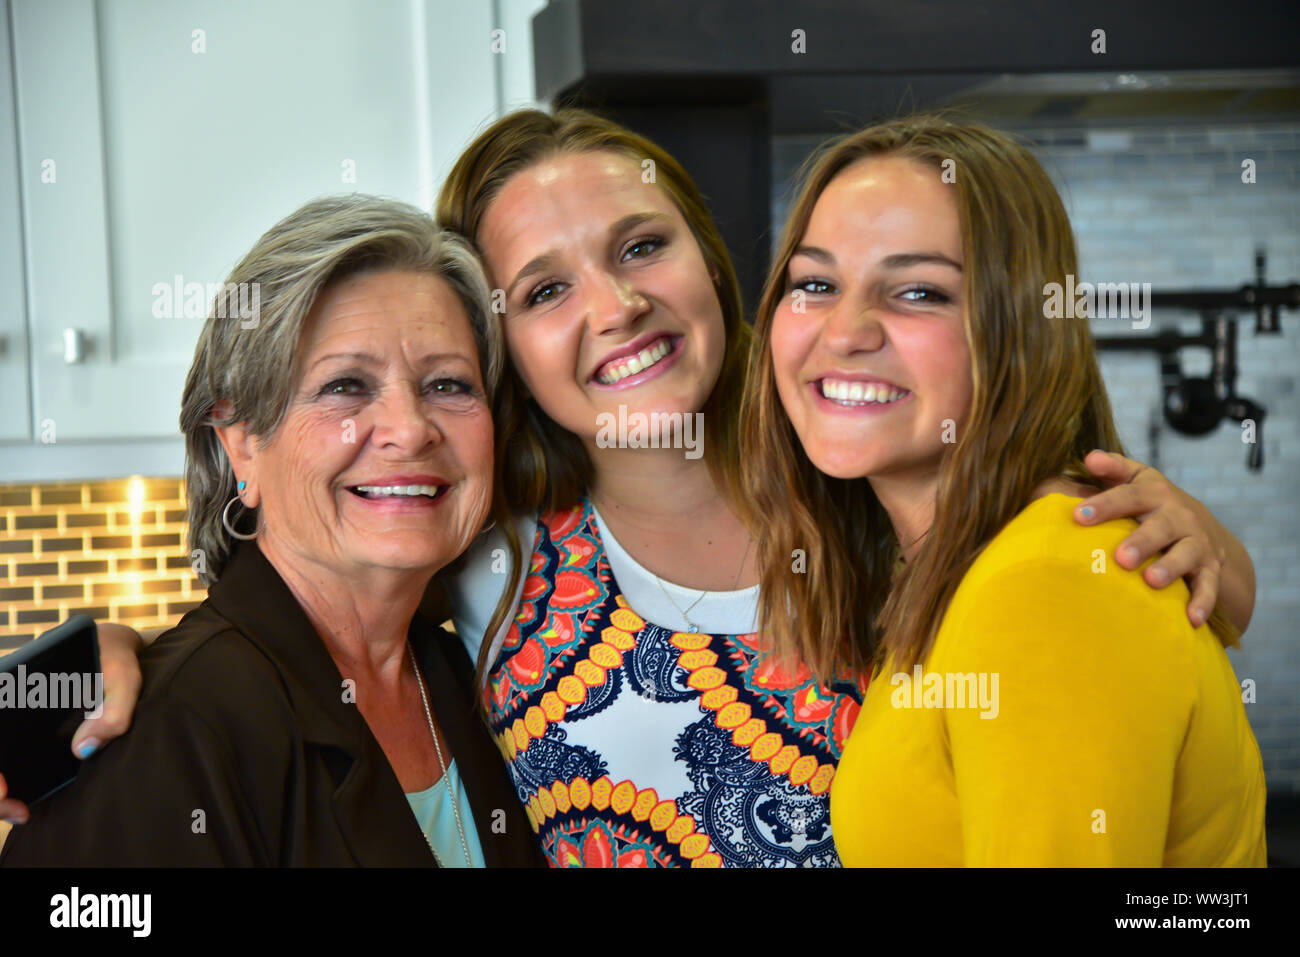 Mothers and daughters, grandmother and granddaughters posing for the camera. Stock Photo